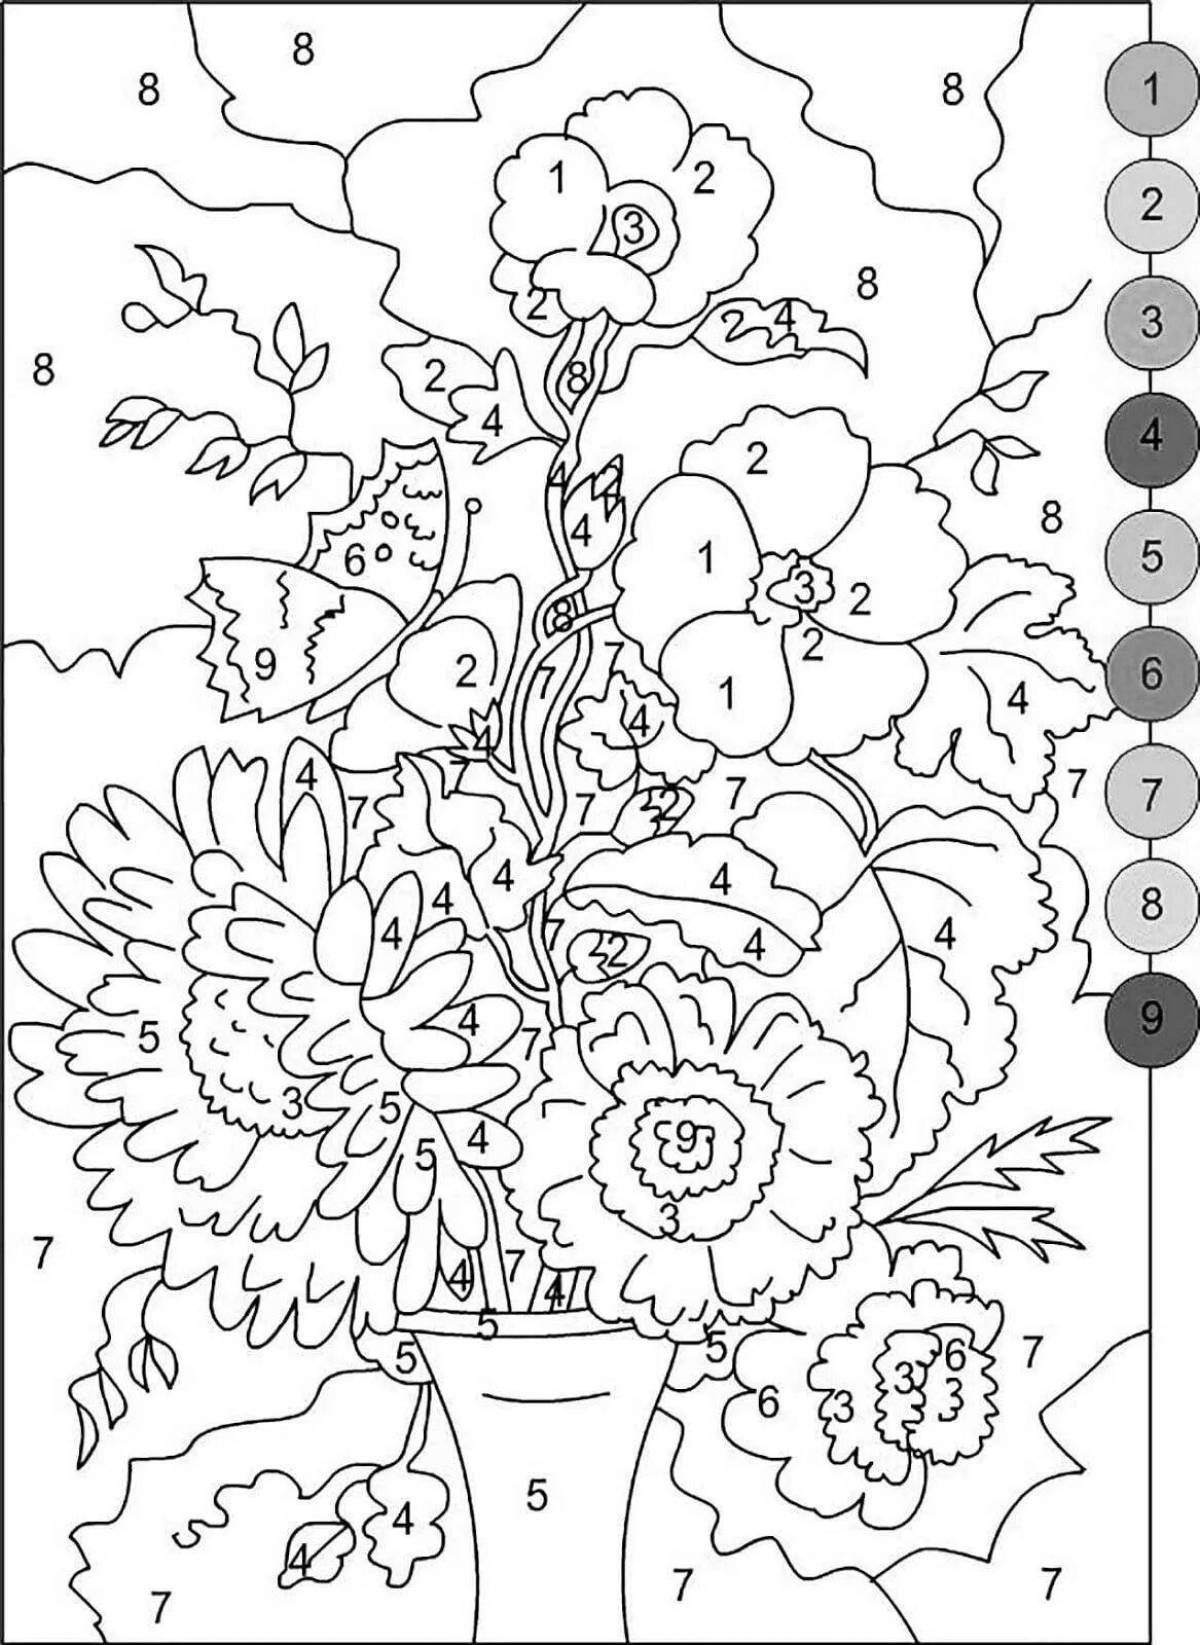 Relaxing coloring book coloring by numbers